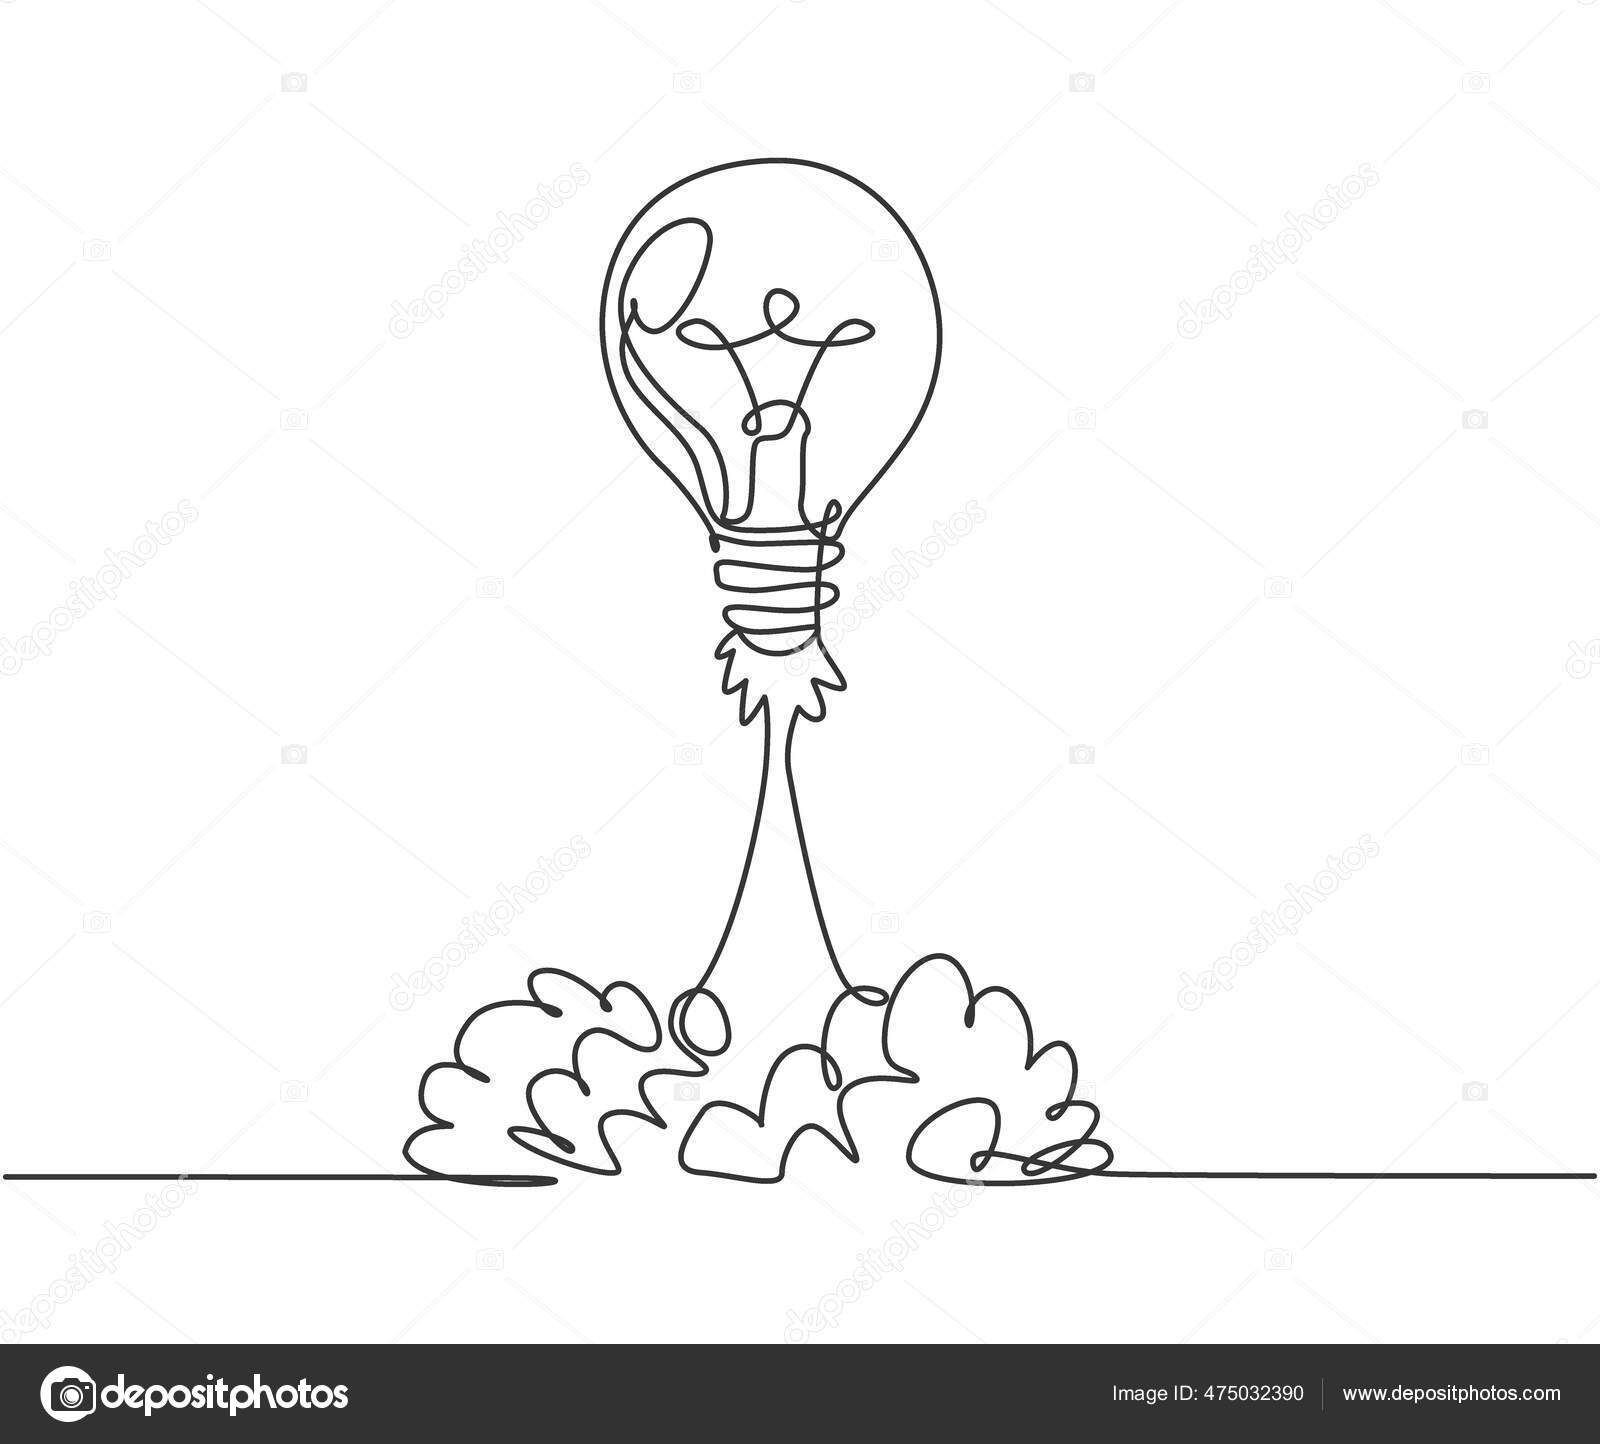 Continuous one line drawing light bulb symbol Vector Image